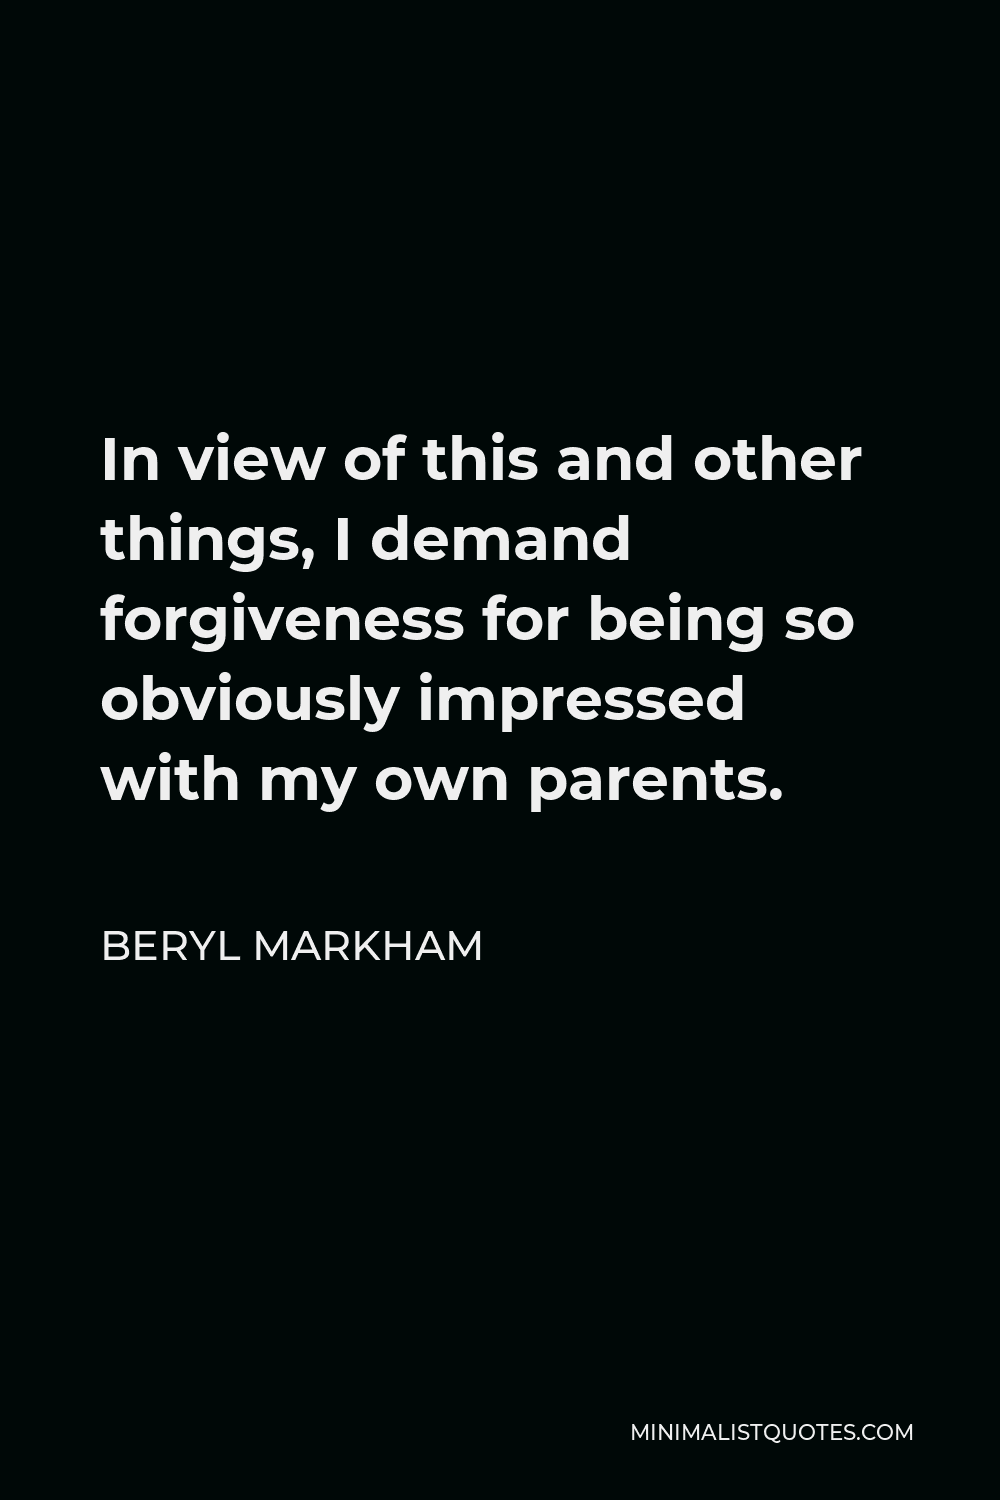 Beryl Markham Quote - In view of this and other things, I demand forgiveness for being so obviously impressed with my own parents.